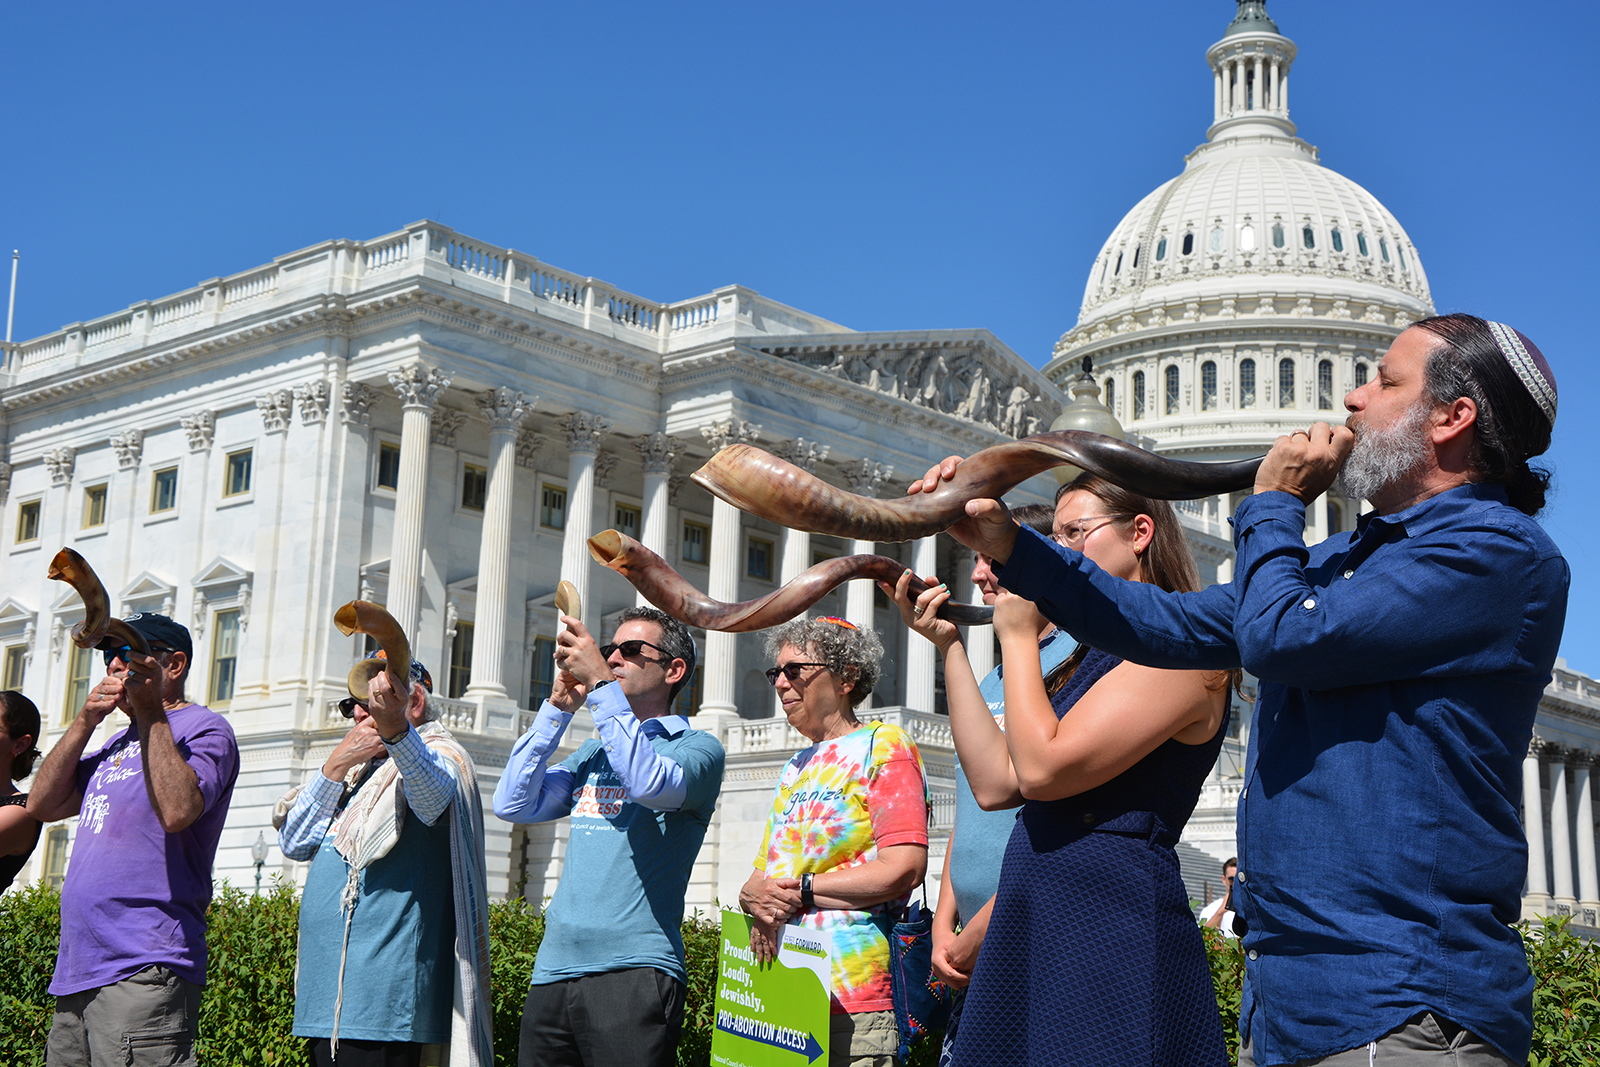 Shofars are blown outside the U.S. Capitol on Sept. 14, 2022, during an abortion rights event organized by the National Council of Jewish Women. RNS photo by Jack Jenkins